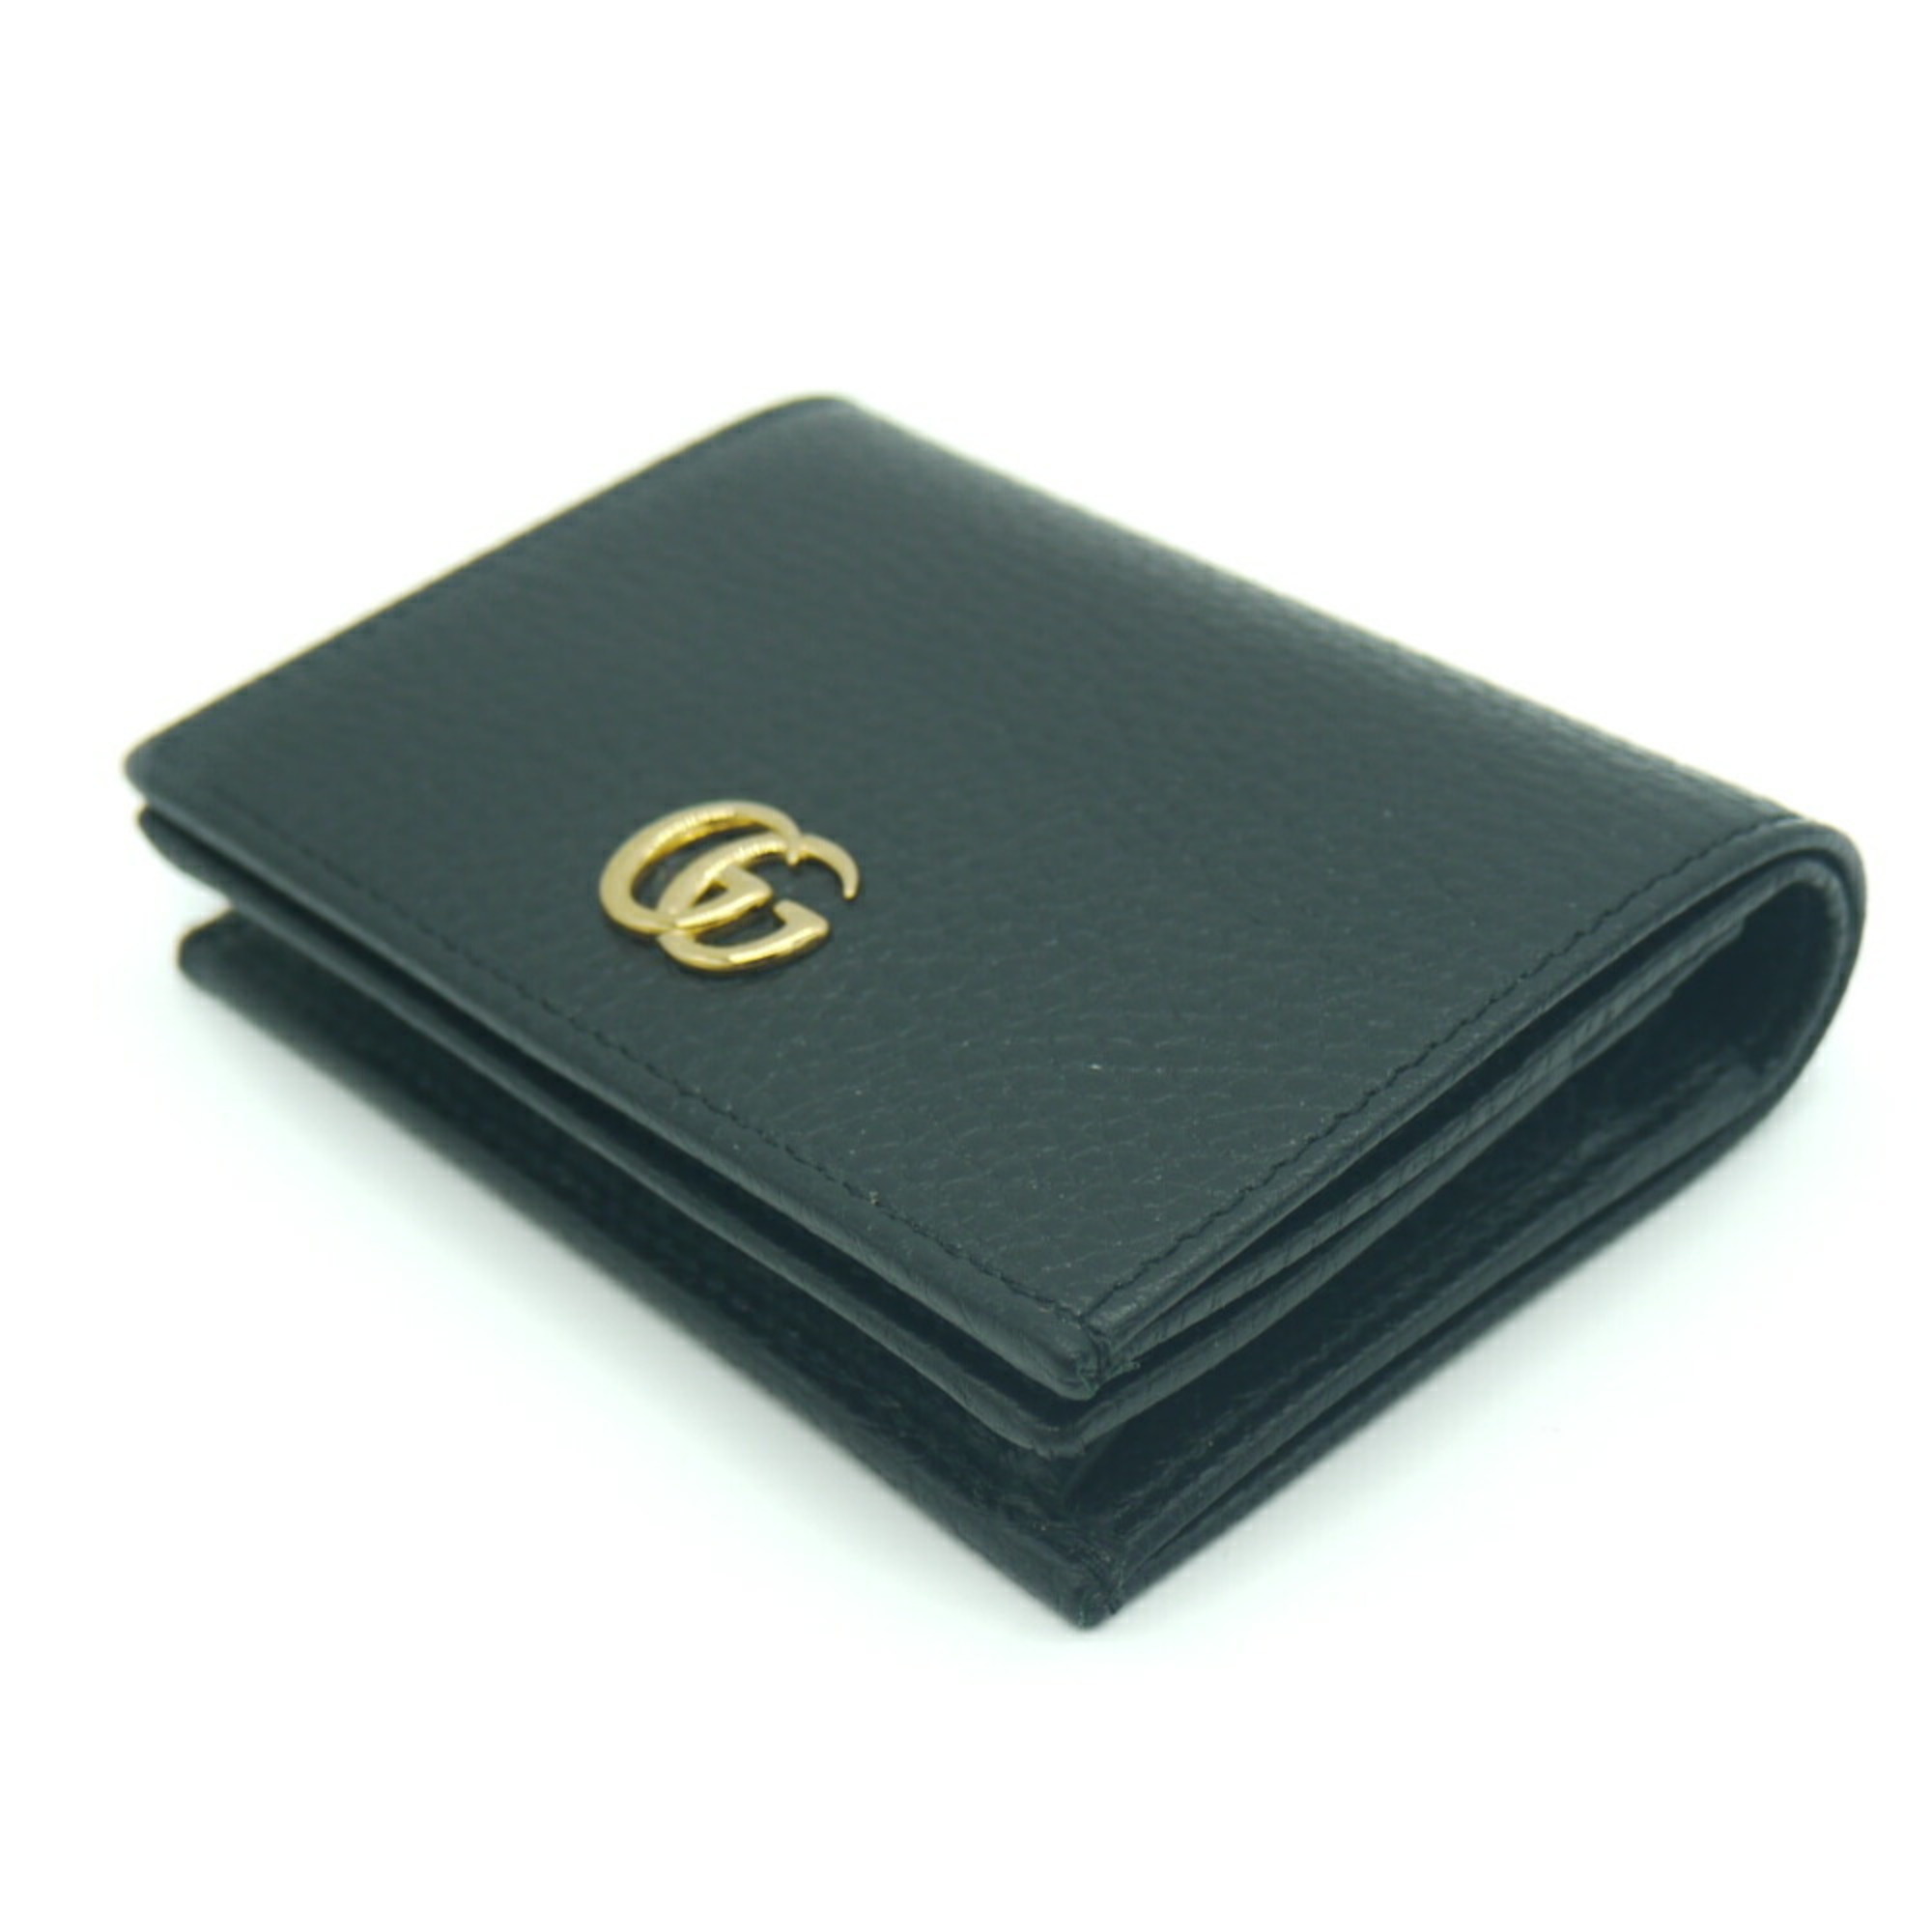 GUCCI Gucci GG Marmont leather card case bi-fold wallet 456126